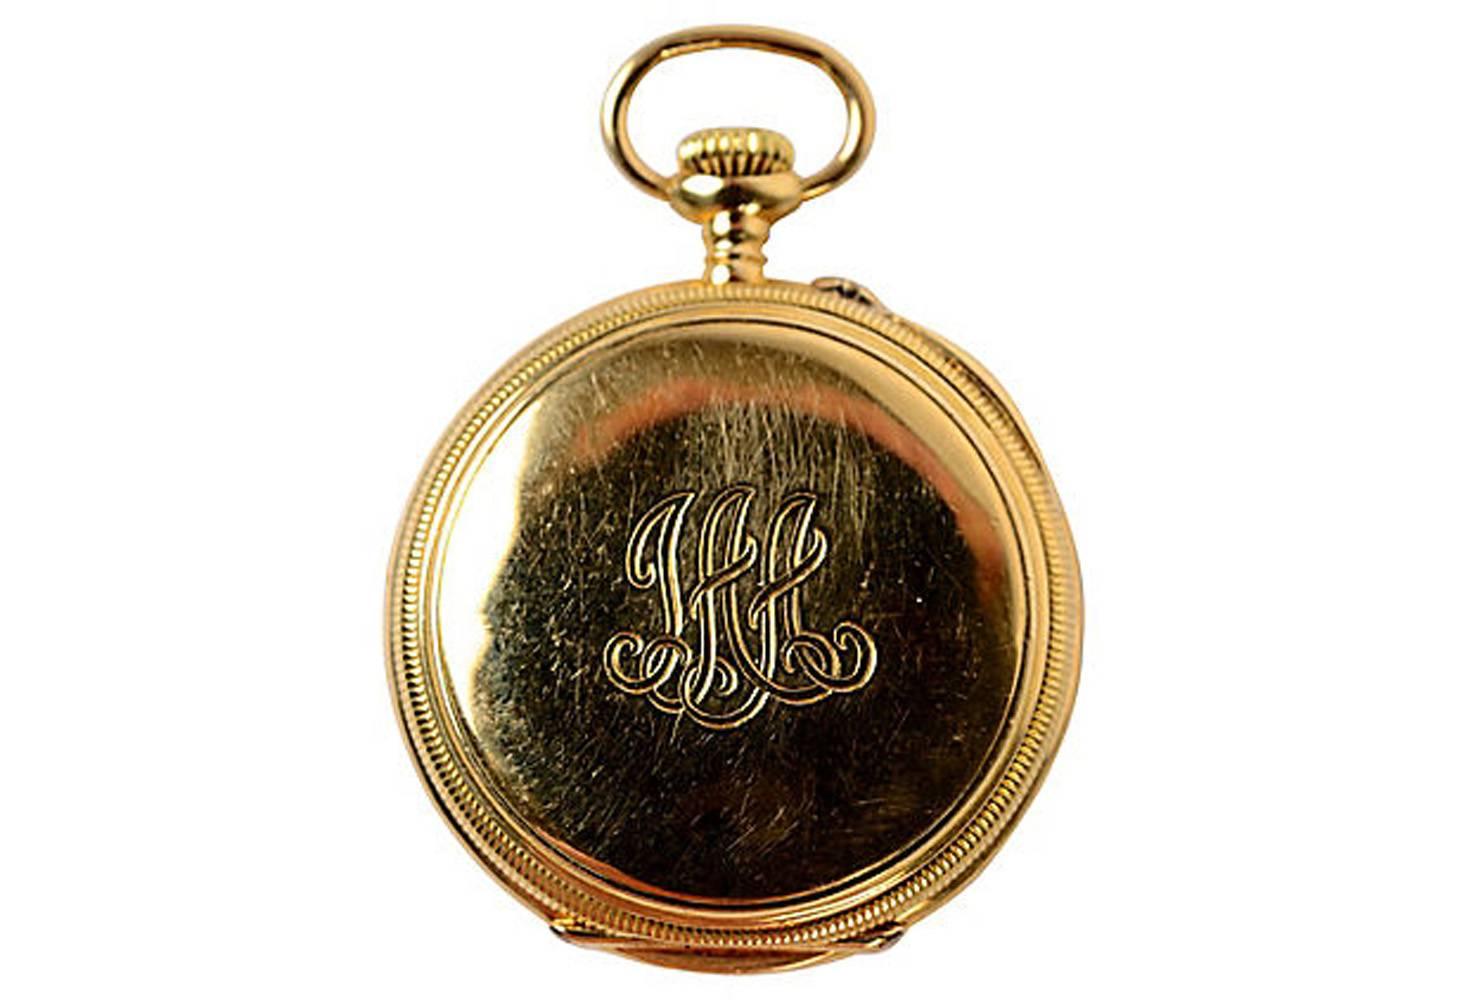 Vacheron Constantin 18K gold pocket watch dating from the late 19th century. Vacheron Constantin, one of the oldest continuously operating watch manufacturers in the world, founded in 1755 by Jean-Marc. It established a reputation for producing